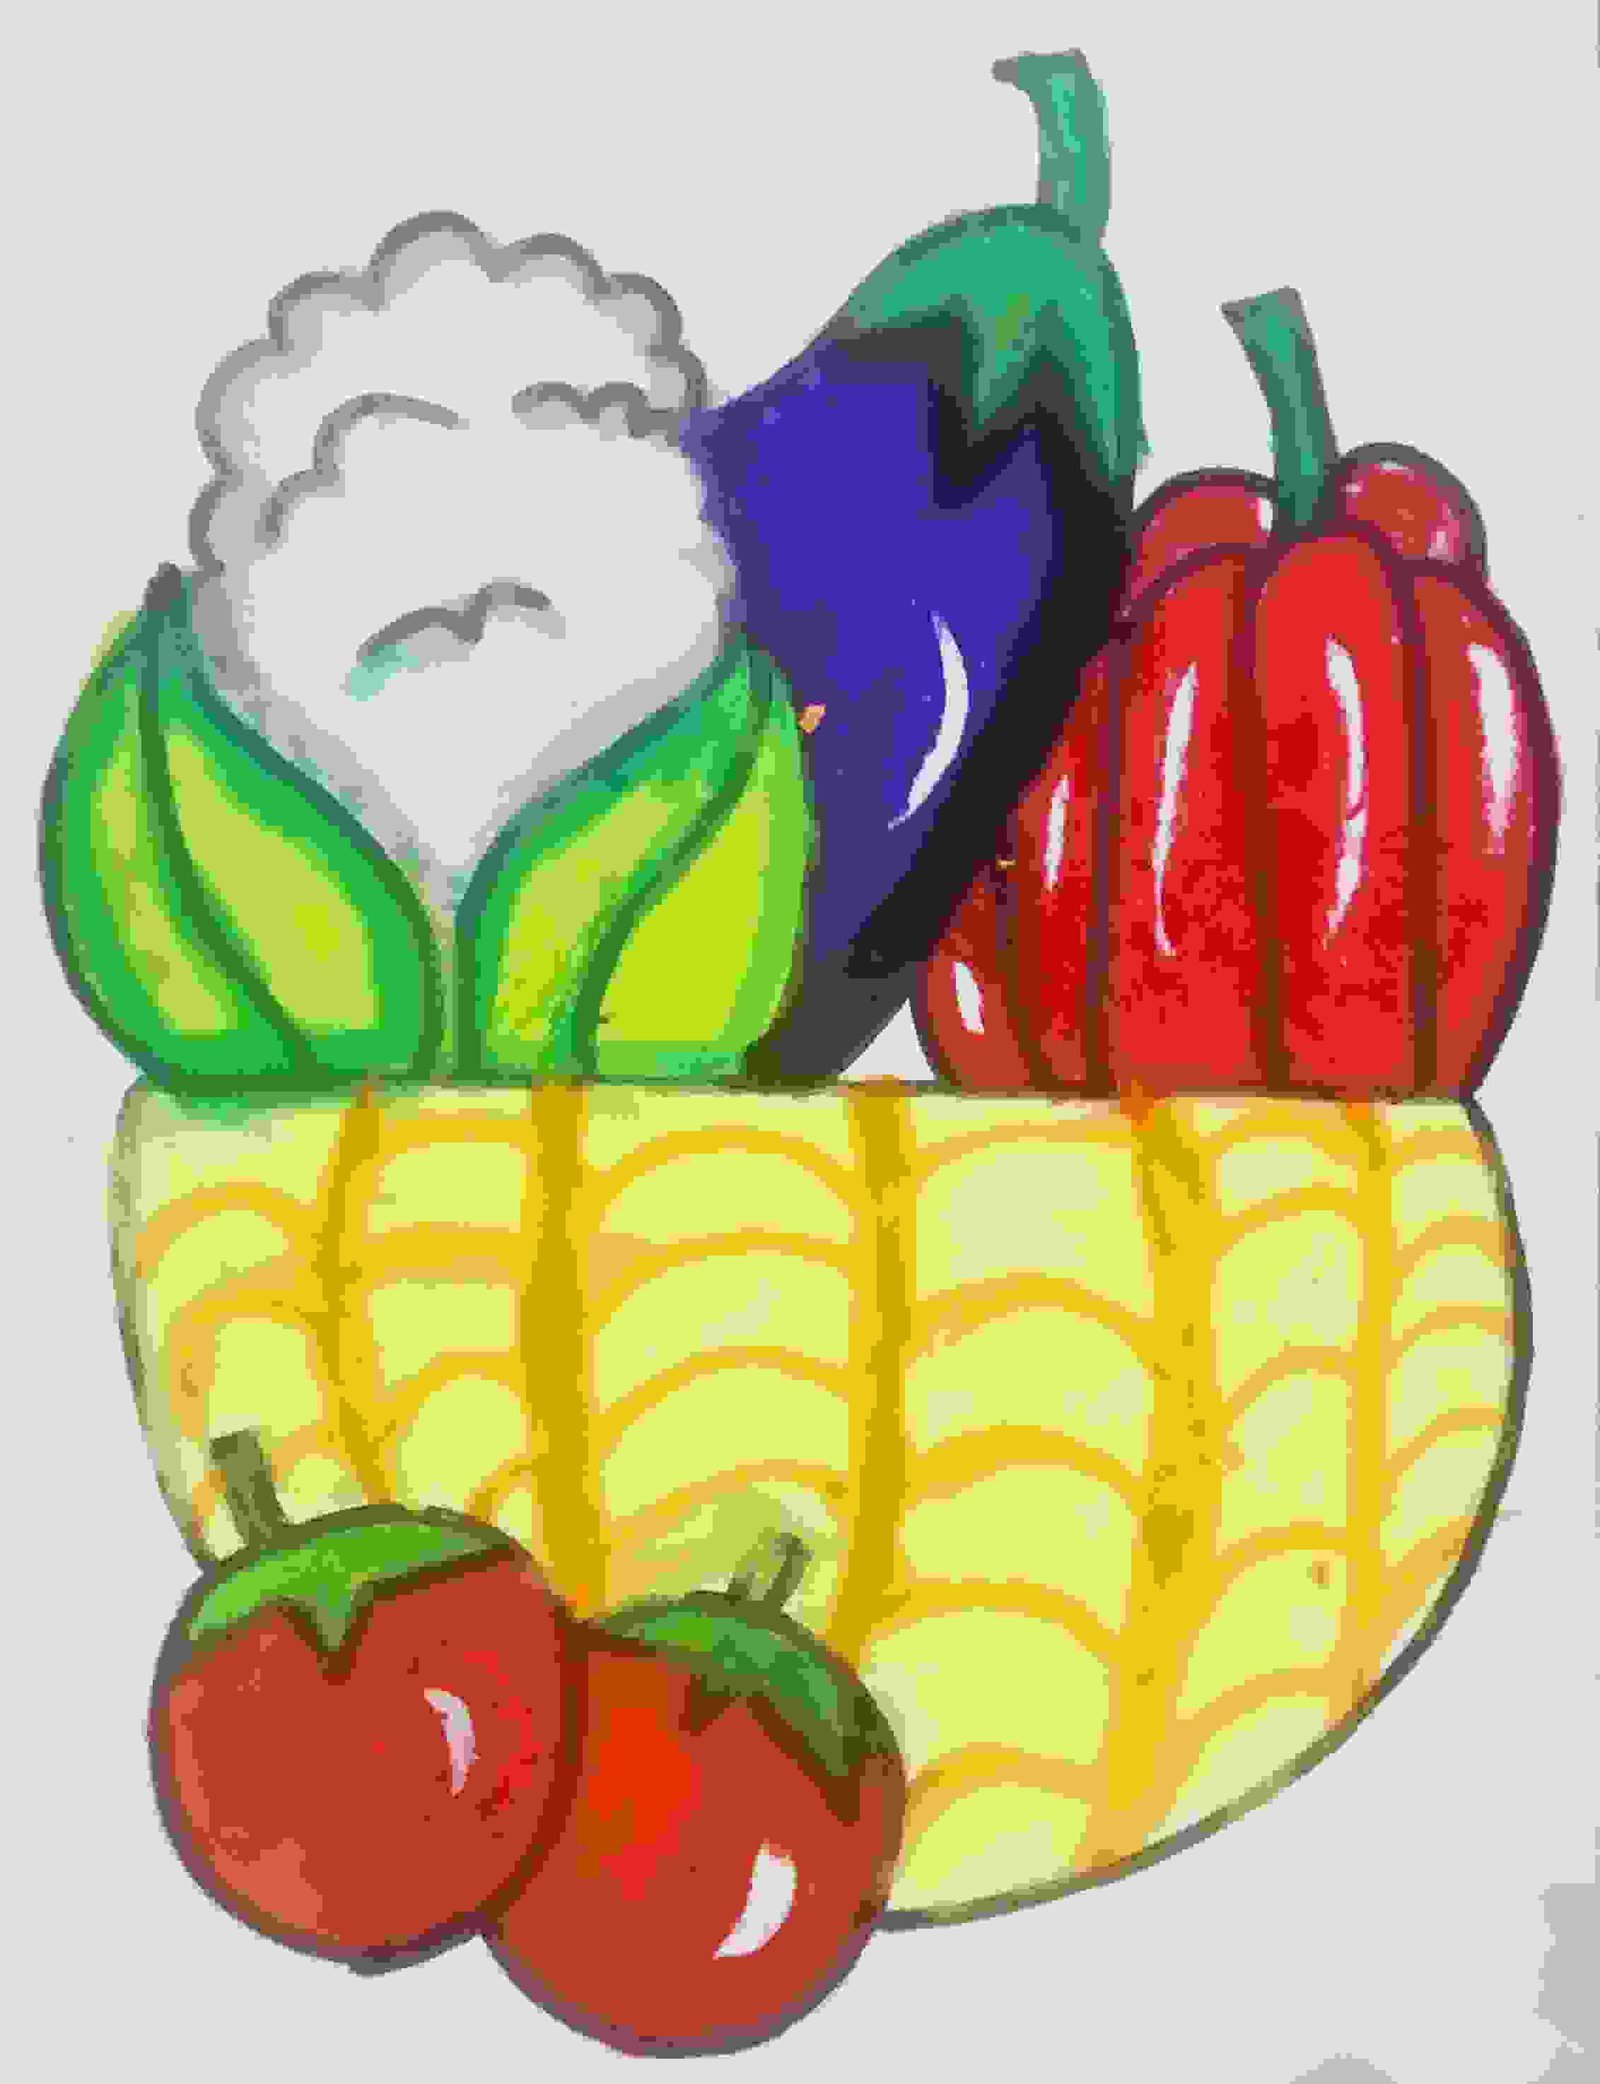 Painting Of Vegetables In Oil Pastels Size A4 Sq